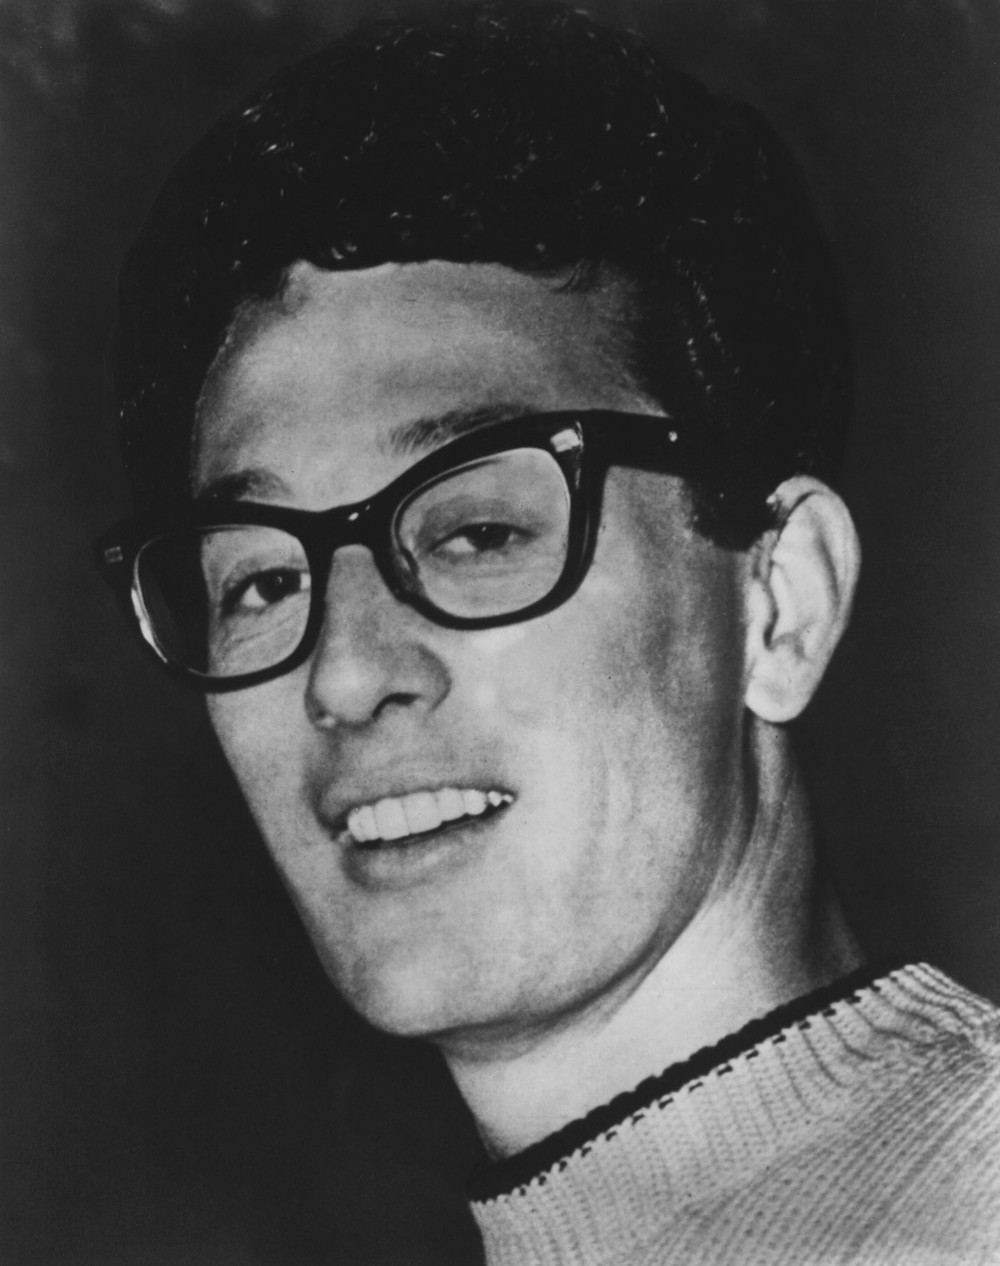 download buddy holly music